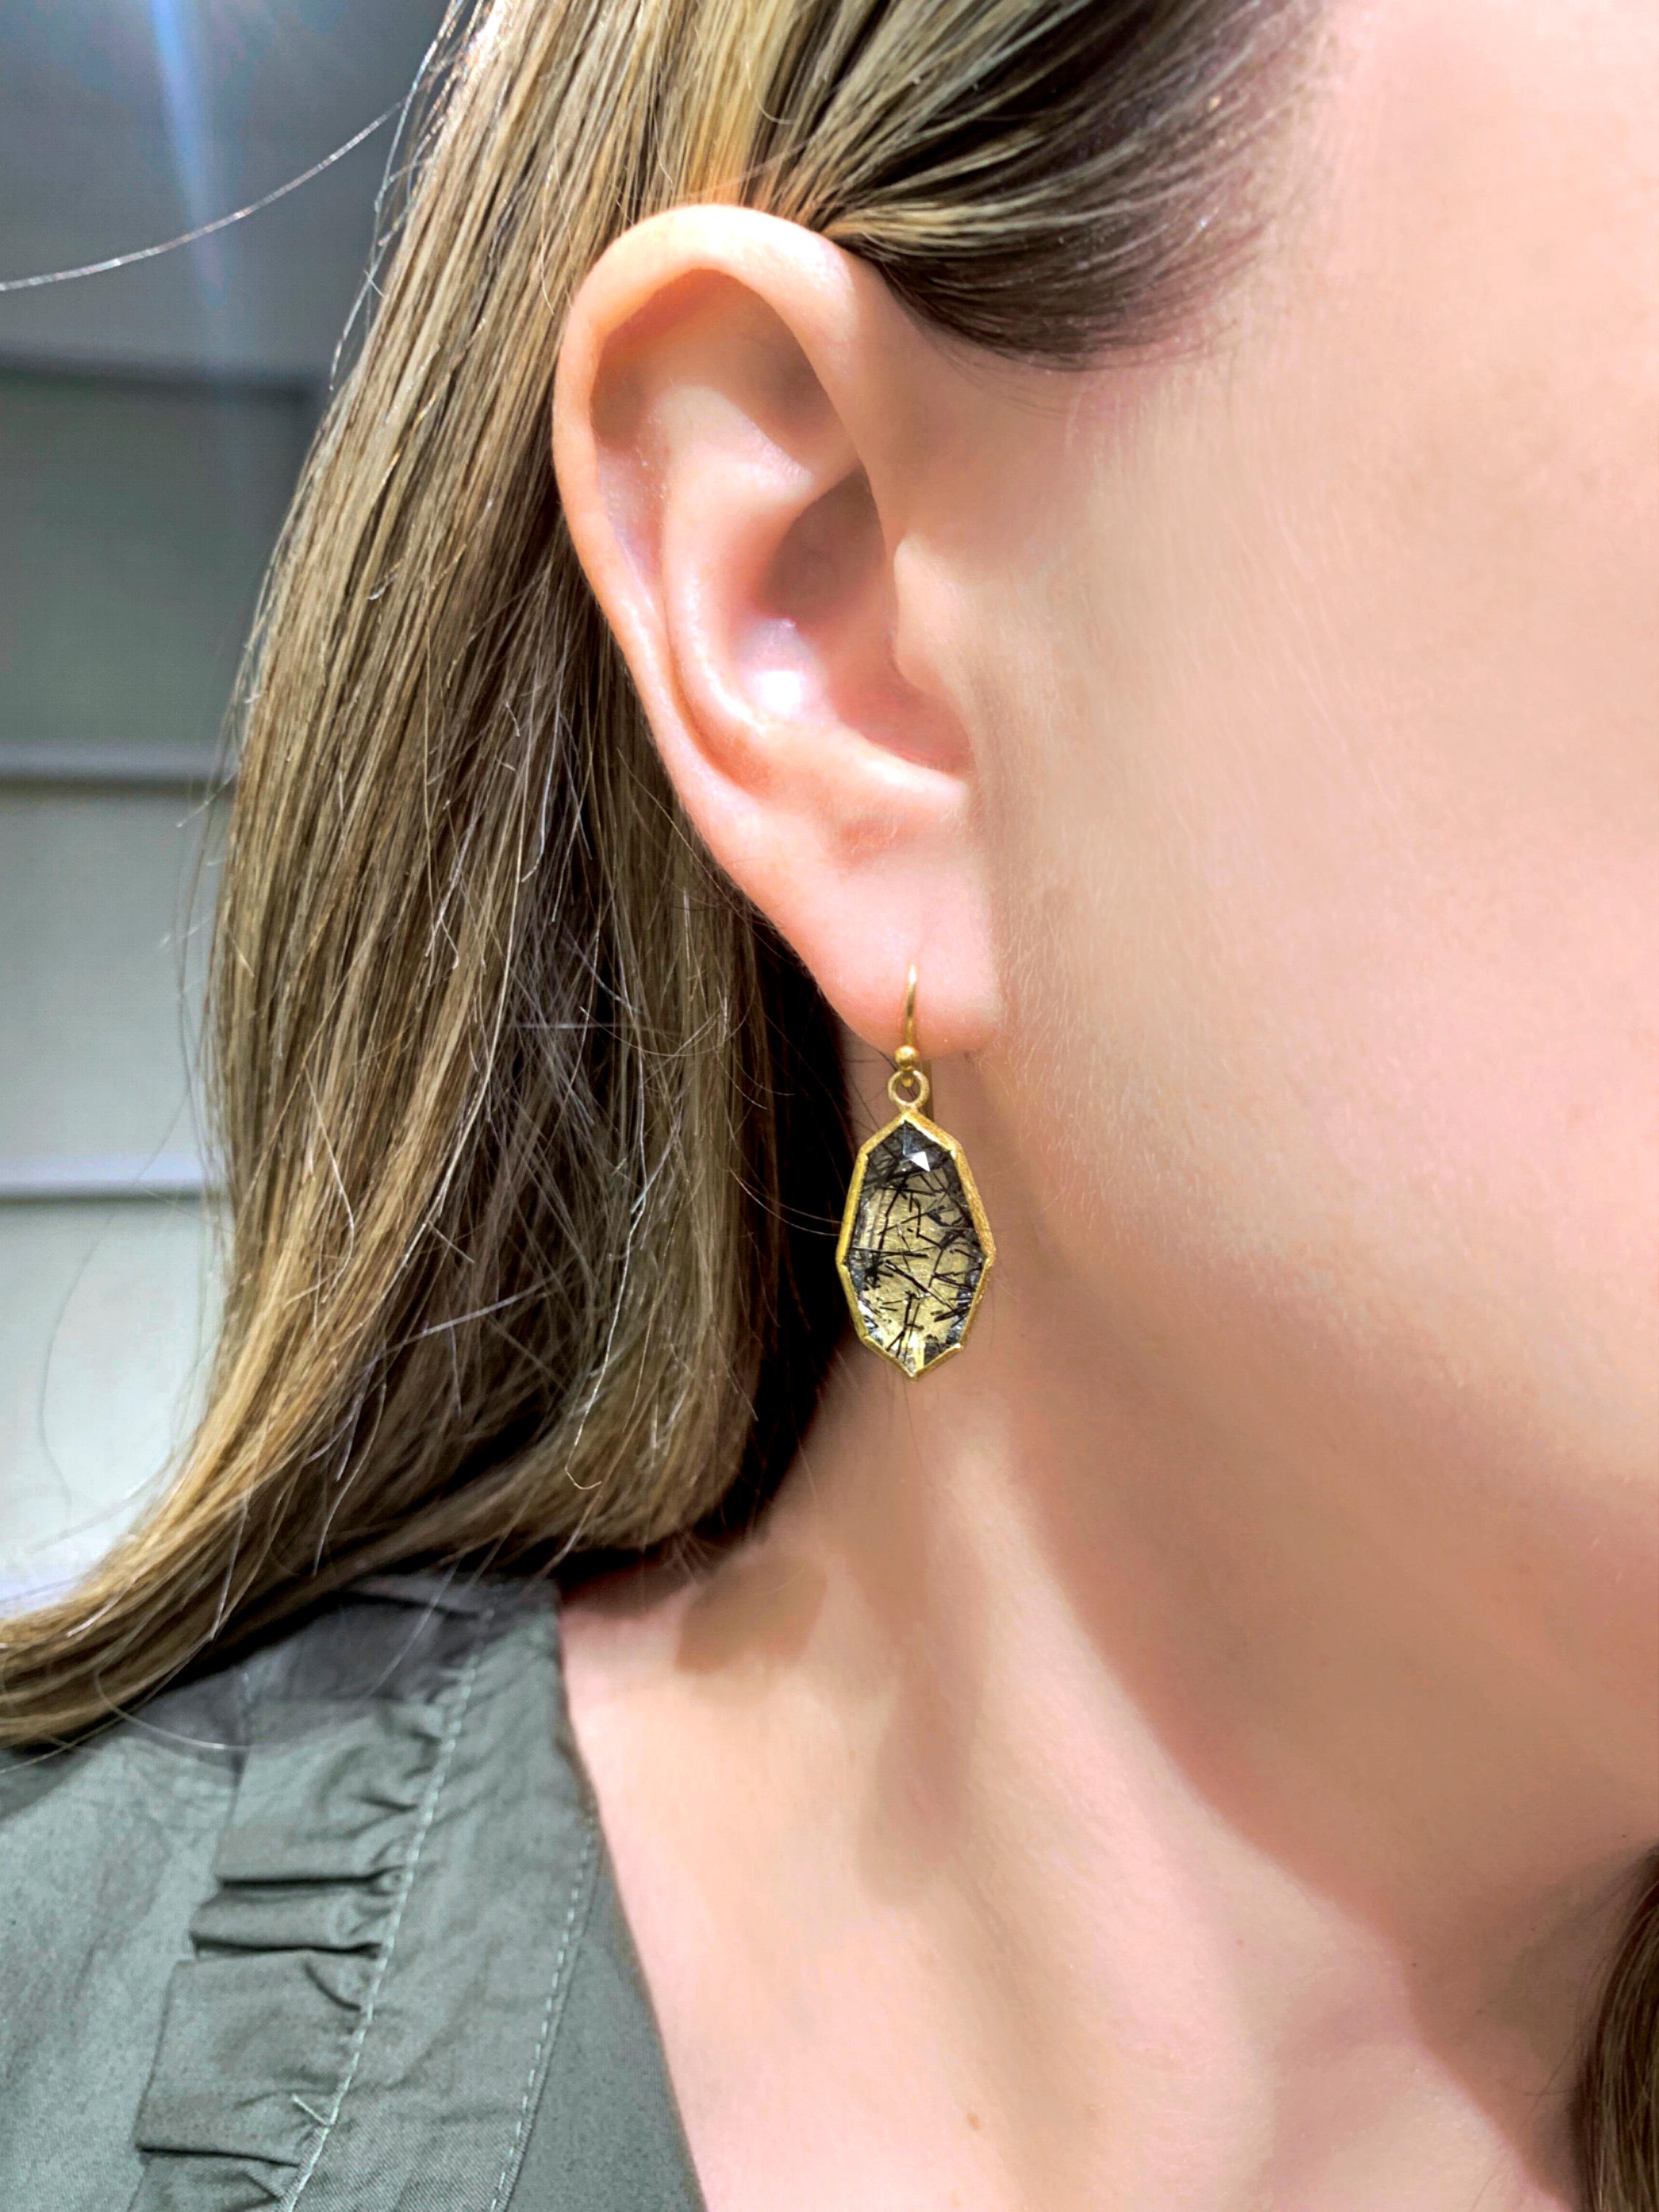 One of a Kind Drop Earrings handmade by acclaimed jewelry artist Petra Class featuring a stunning matched pair of octagonal rose-cut black tourmalinated quartz, a naturally occurring gemstone featuring a shimmering quartz inlaid with three